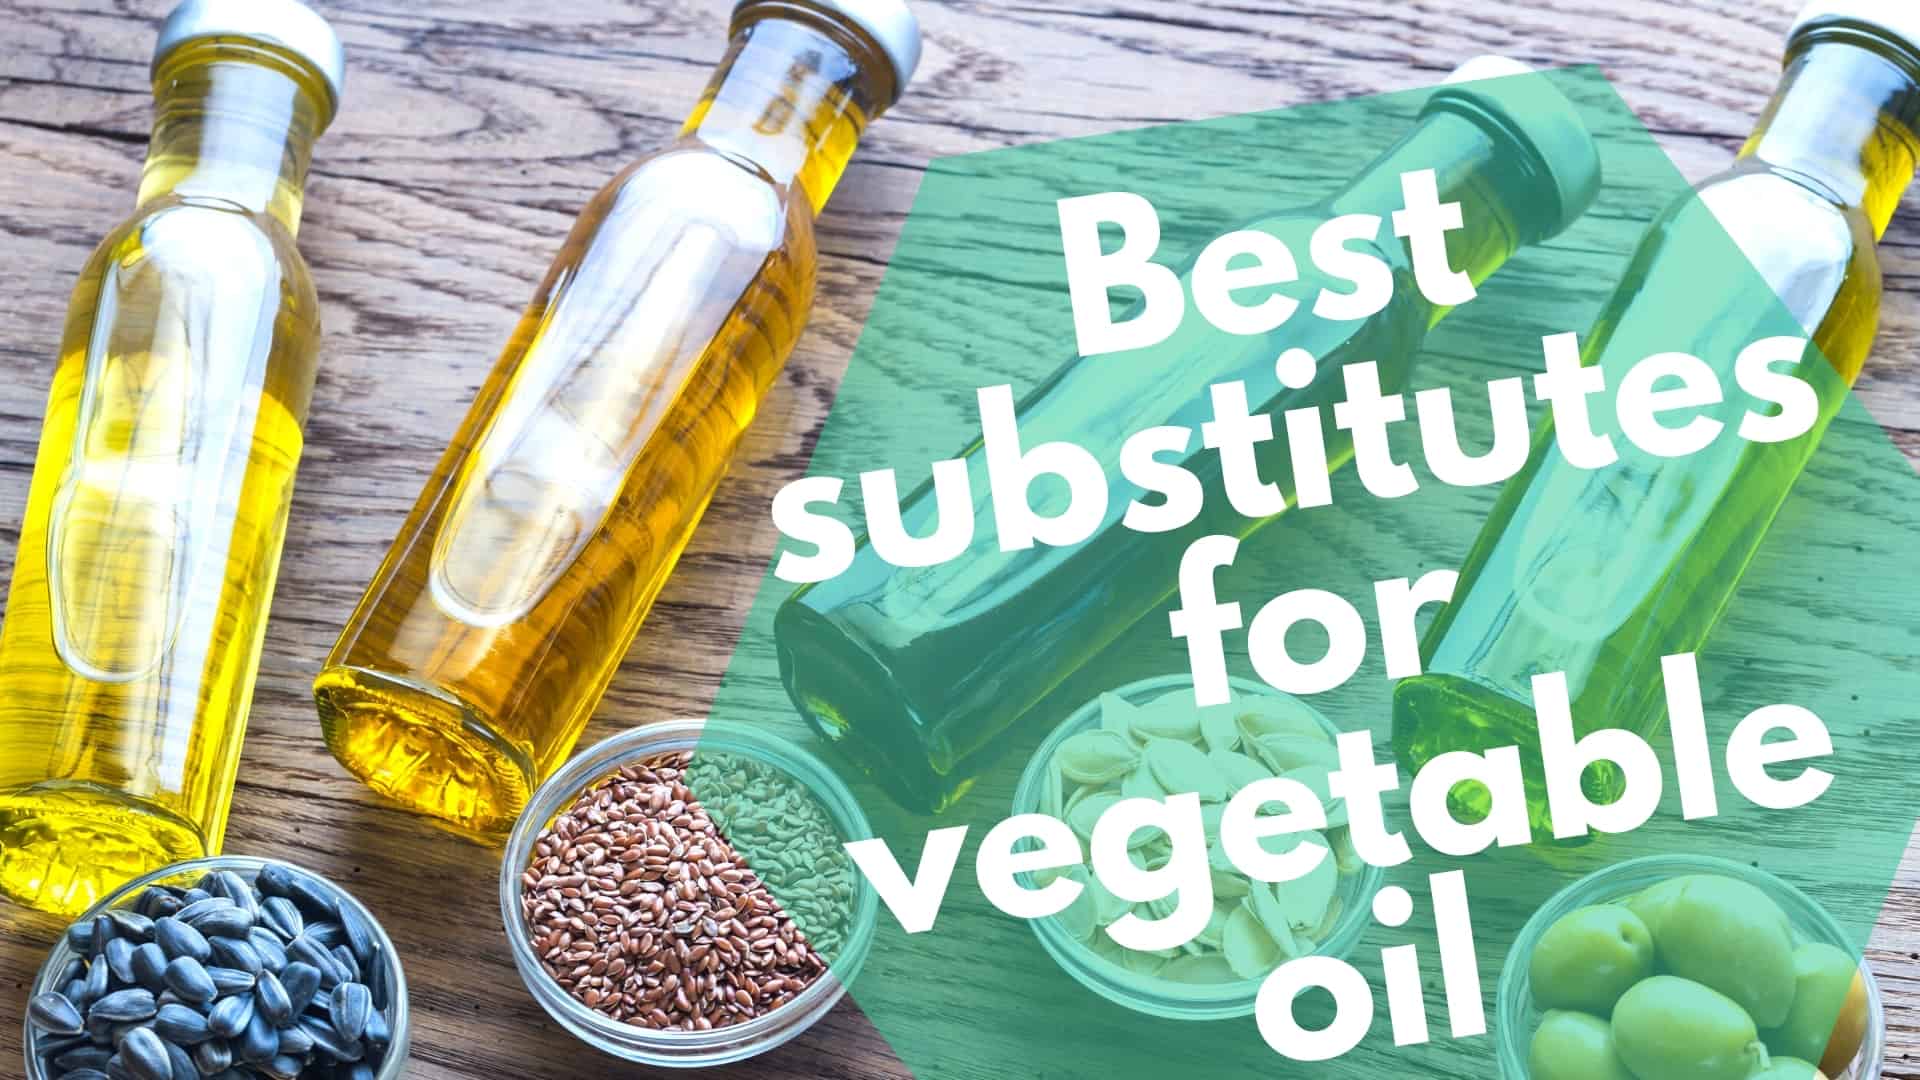 Best substitutes for vegetable oil